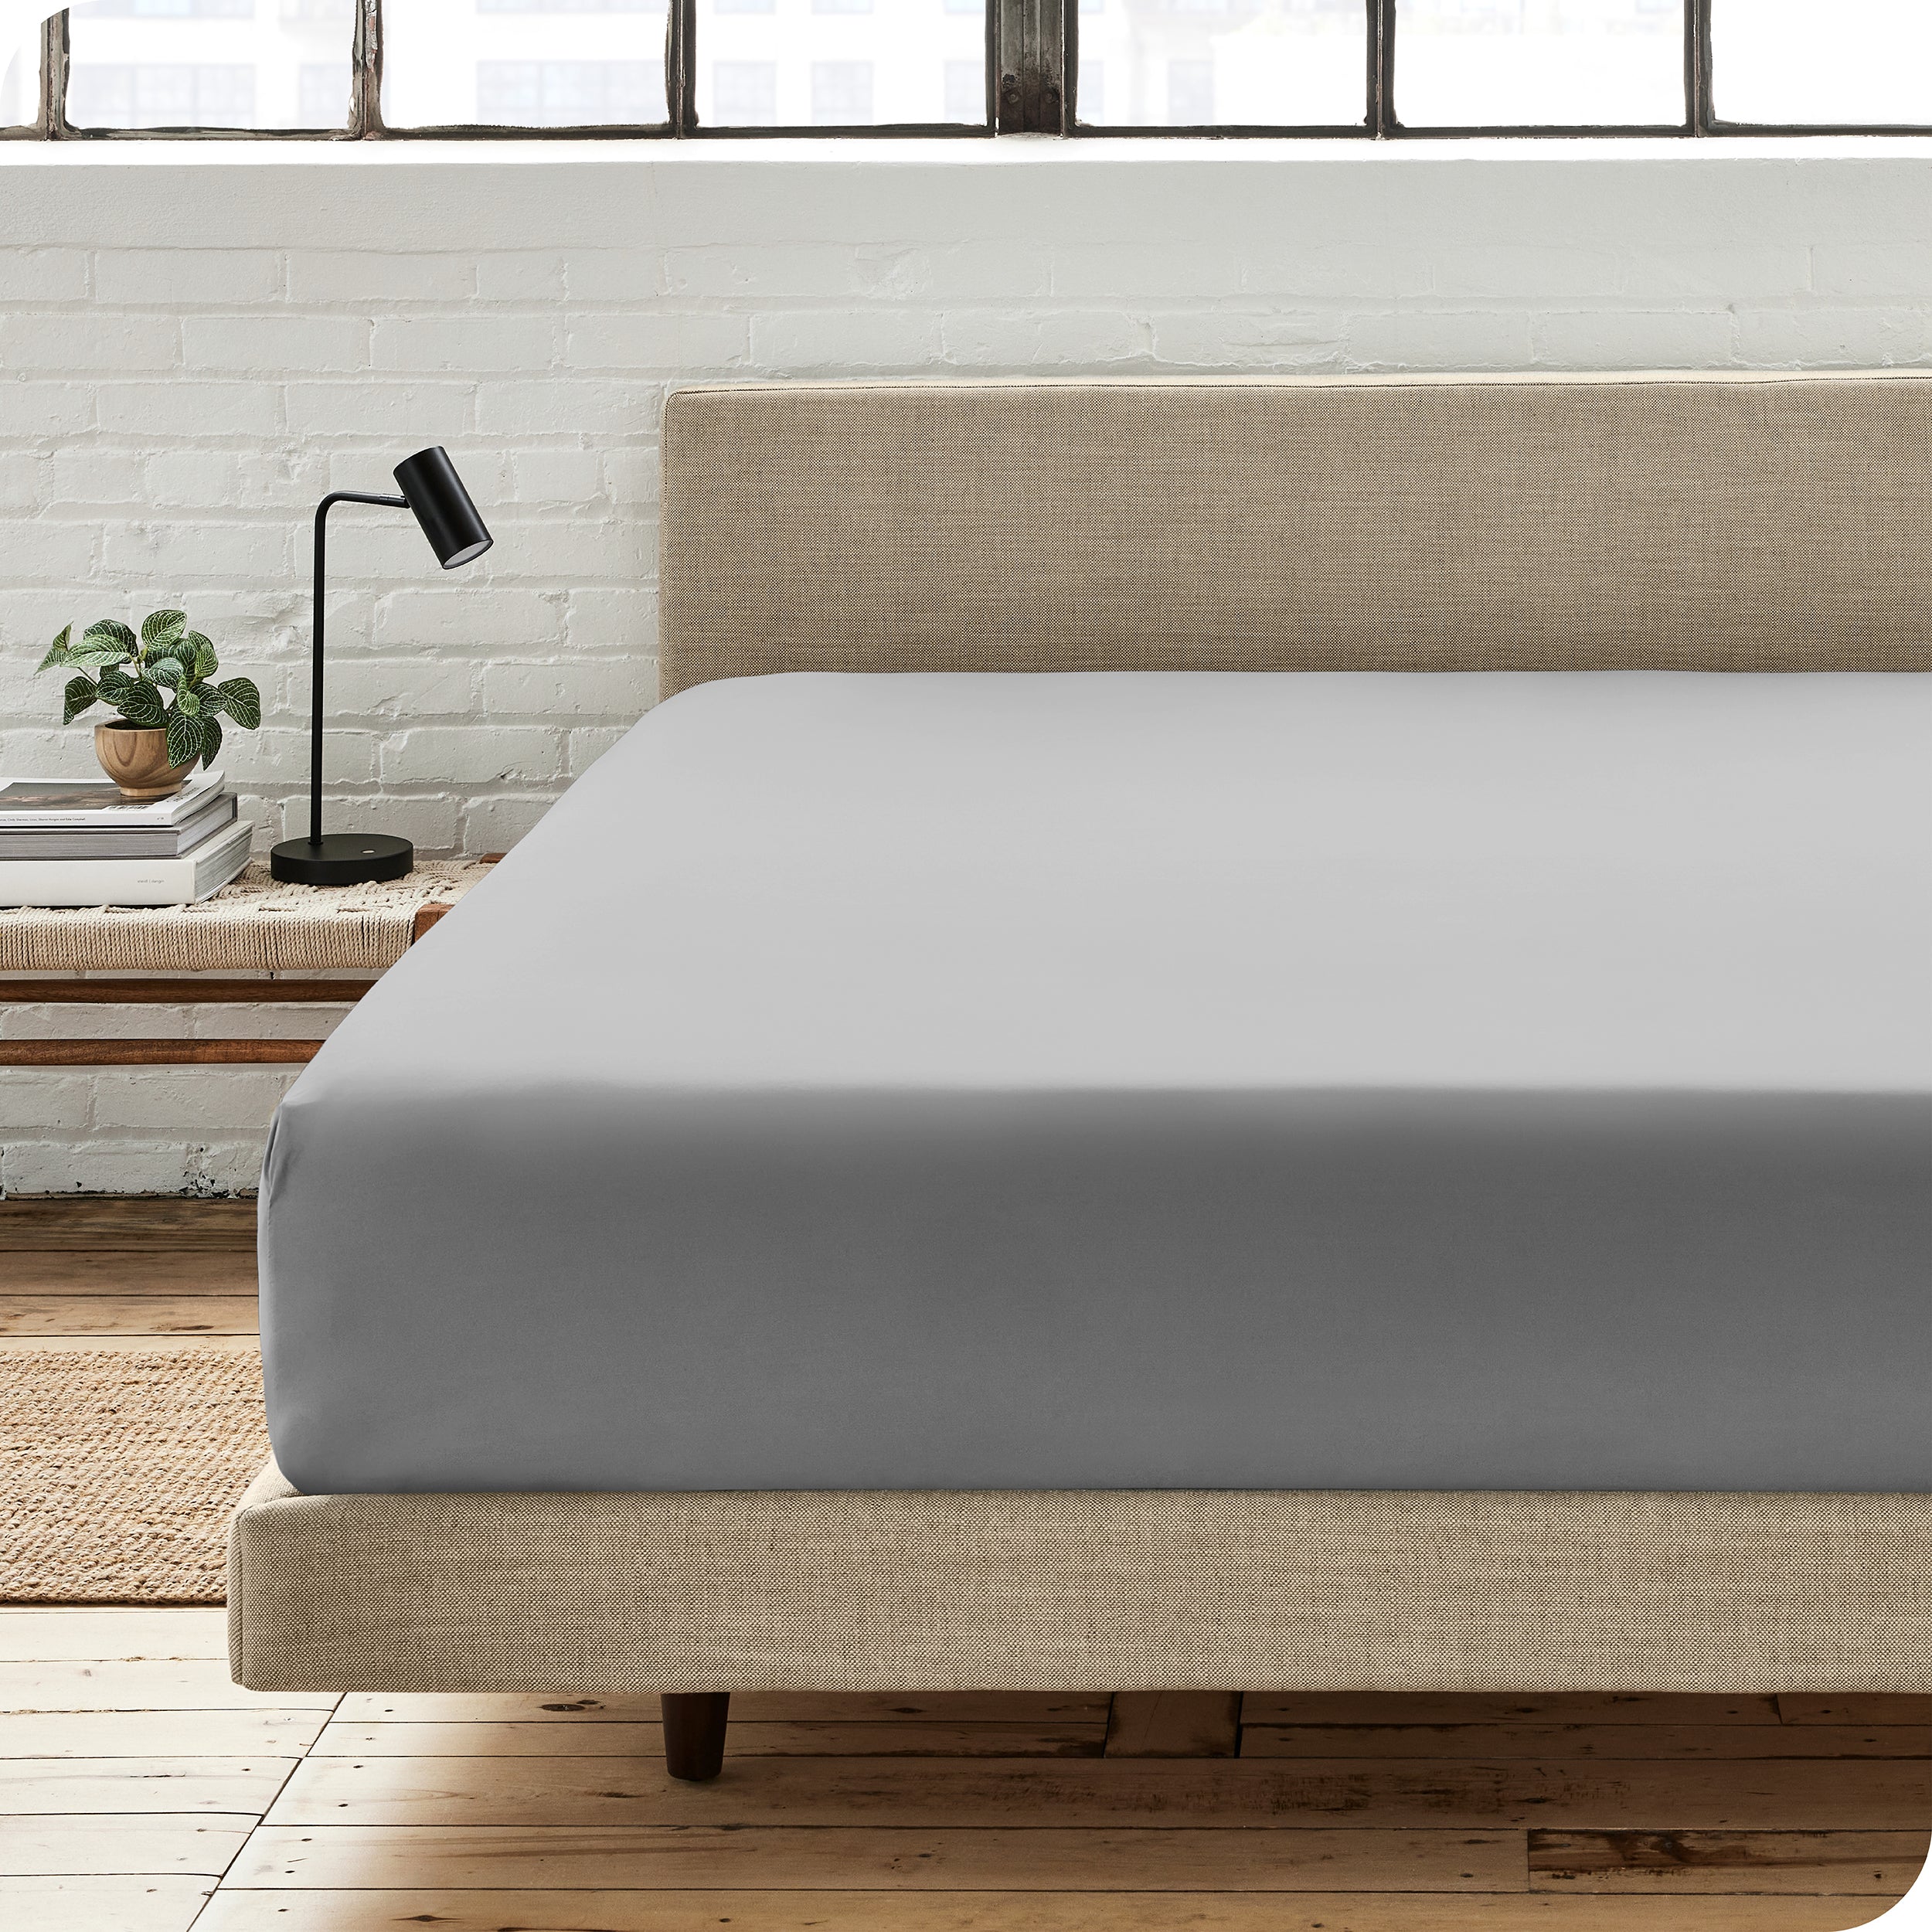 Modern bedroom with a fitted sheet which fits deep mattresses up to 15 inches